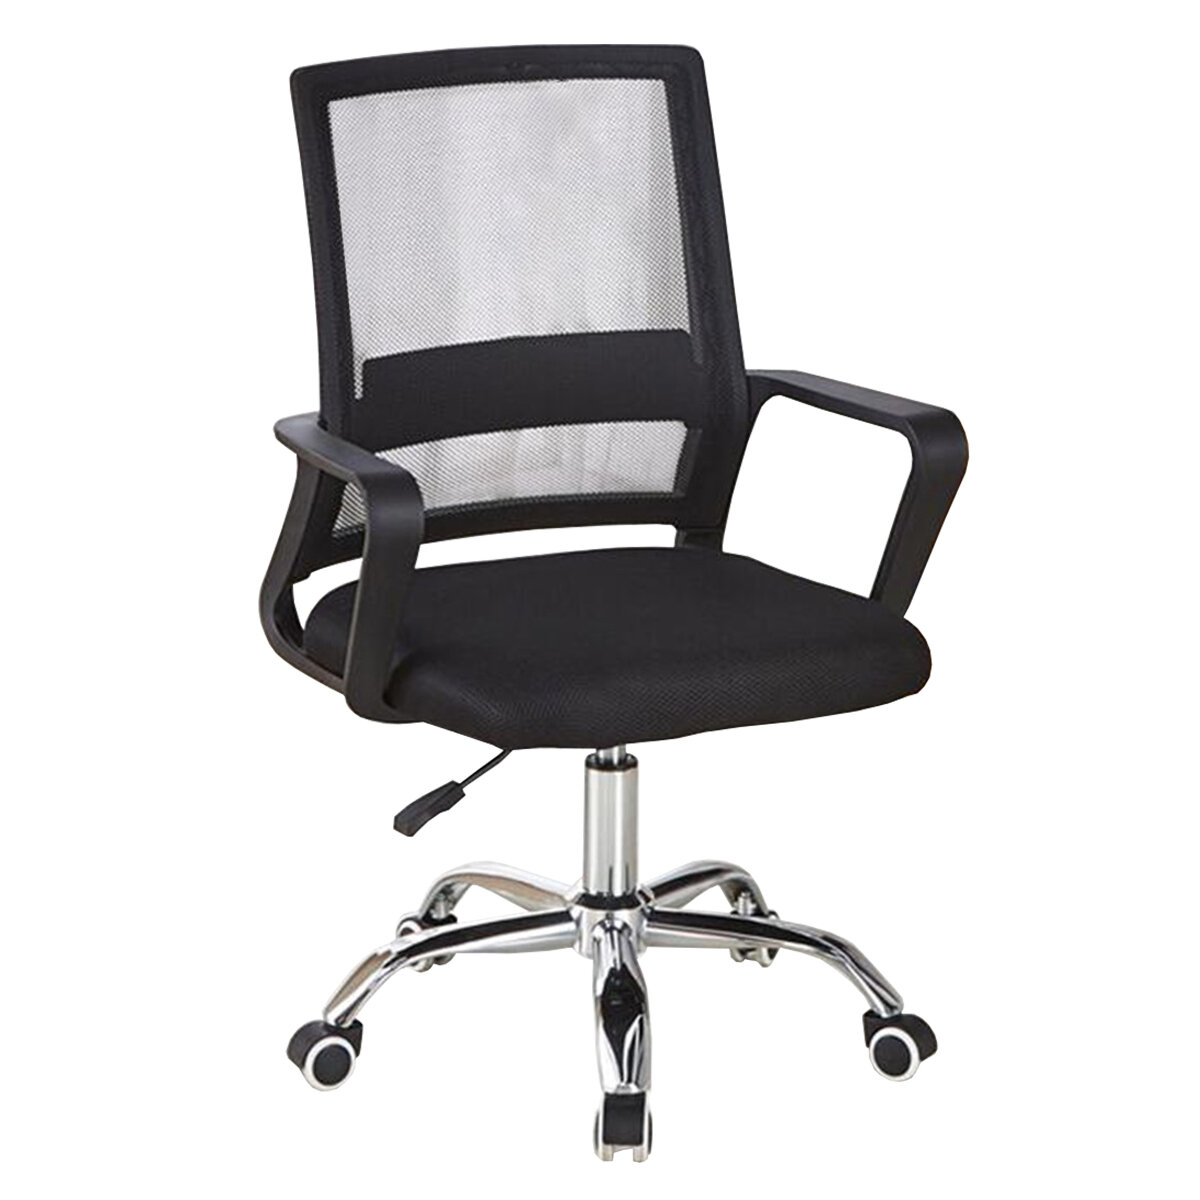 

Office Mesh Chair Ergonomic Swivel Mid-back Computer Desk Seat Metal Base Adjustable Lifting Chair Home Office Furniture